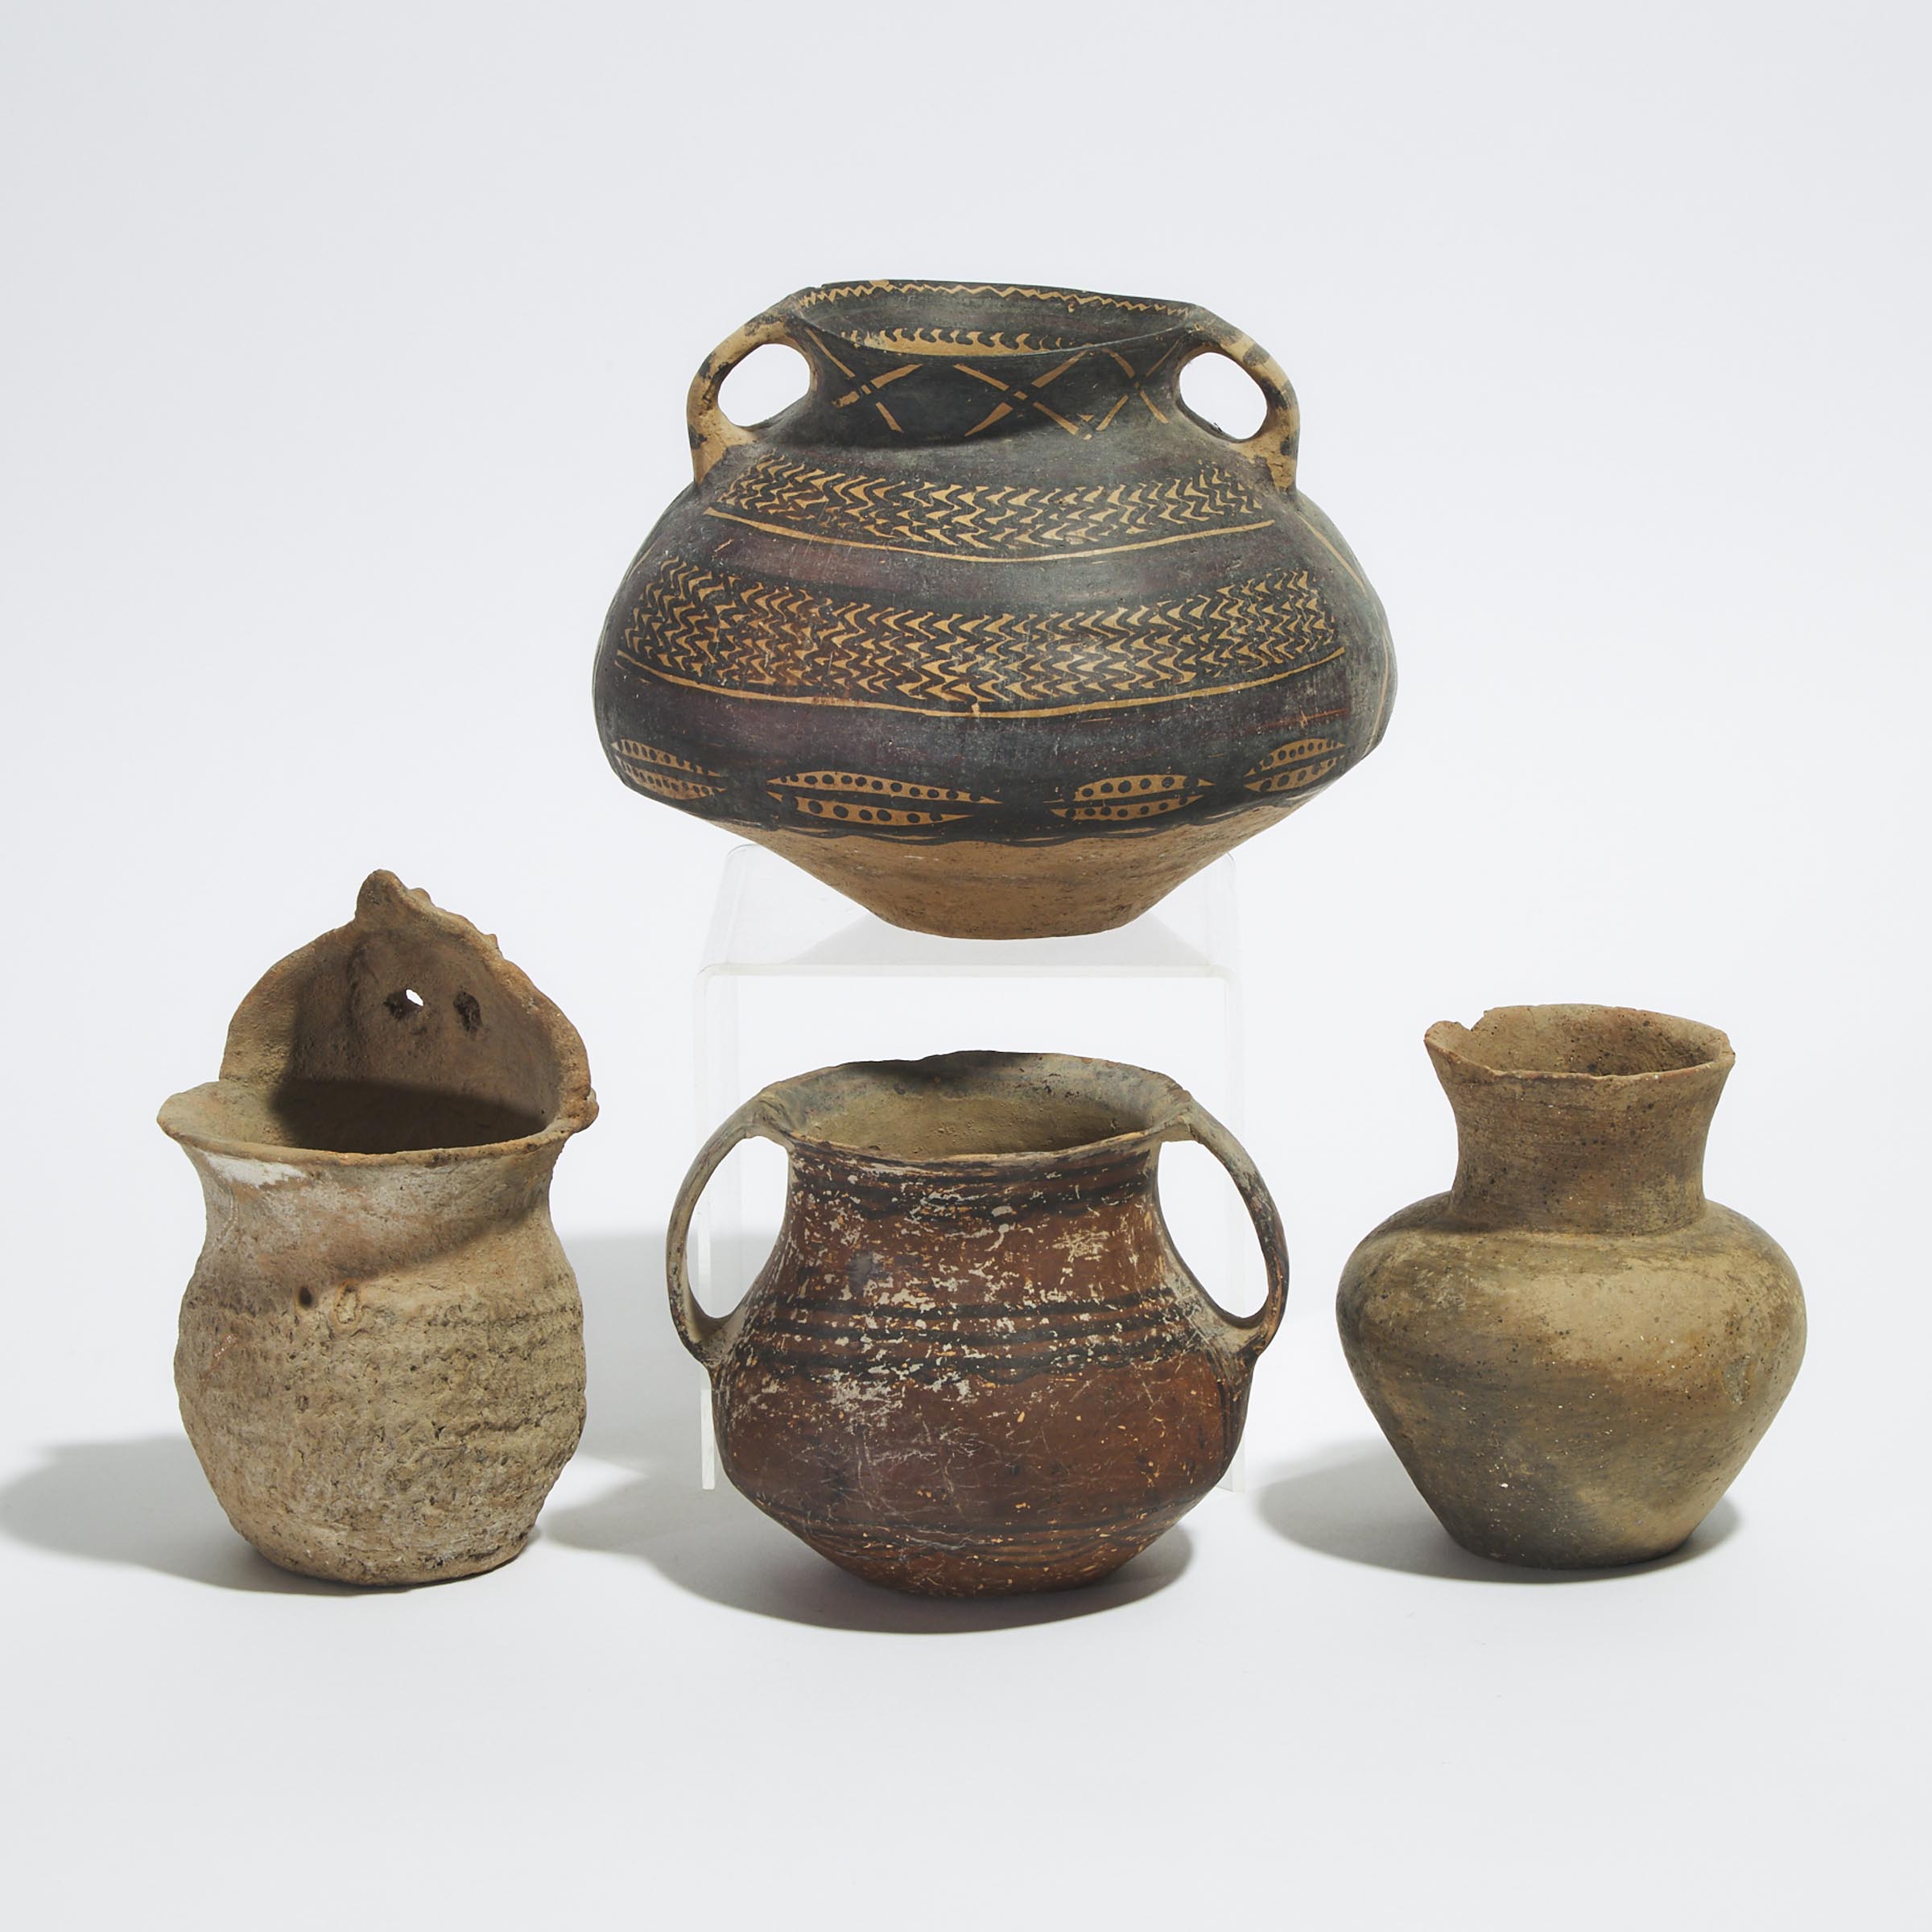 A Group of Four Pottery Jars, Neolithic Period